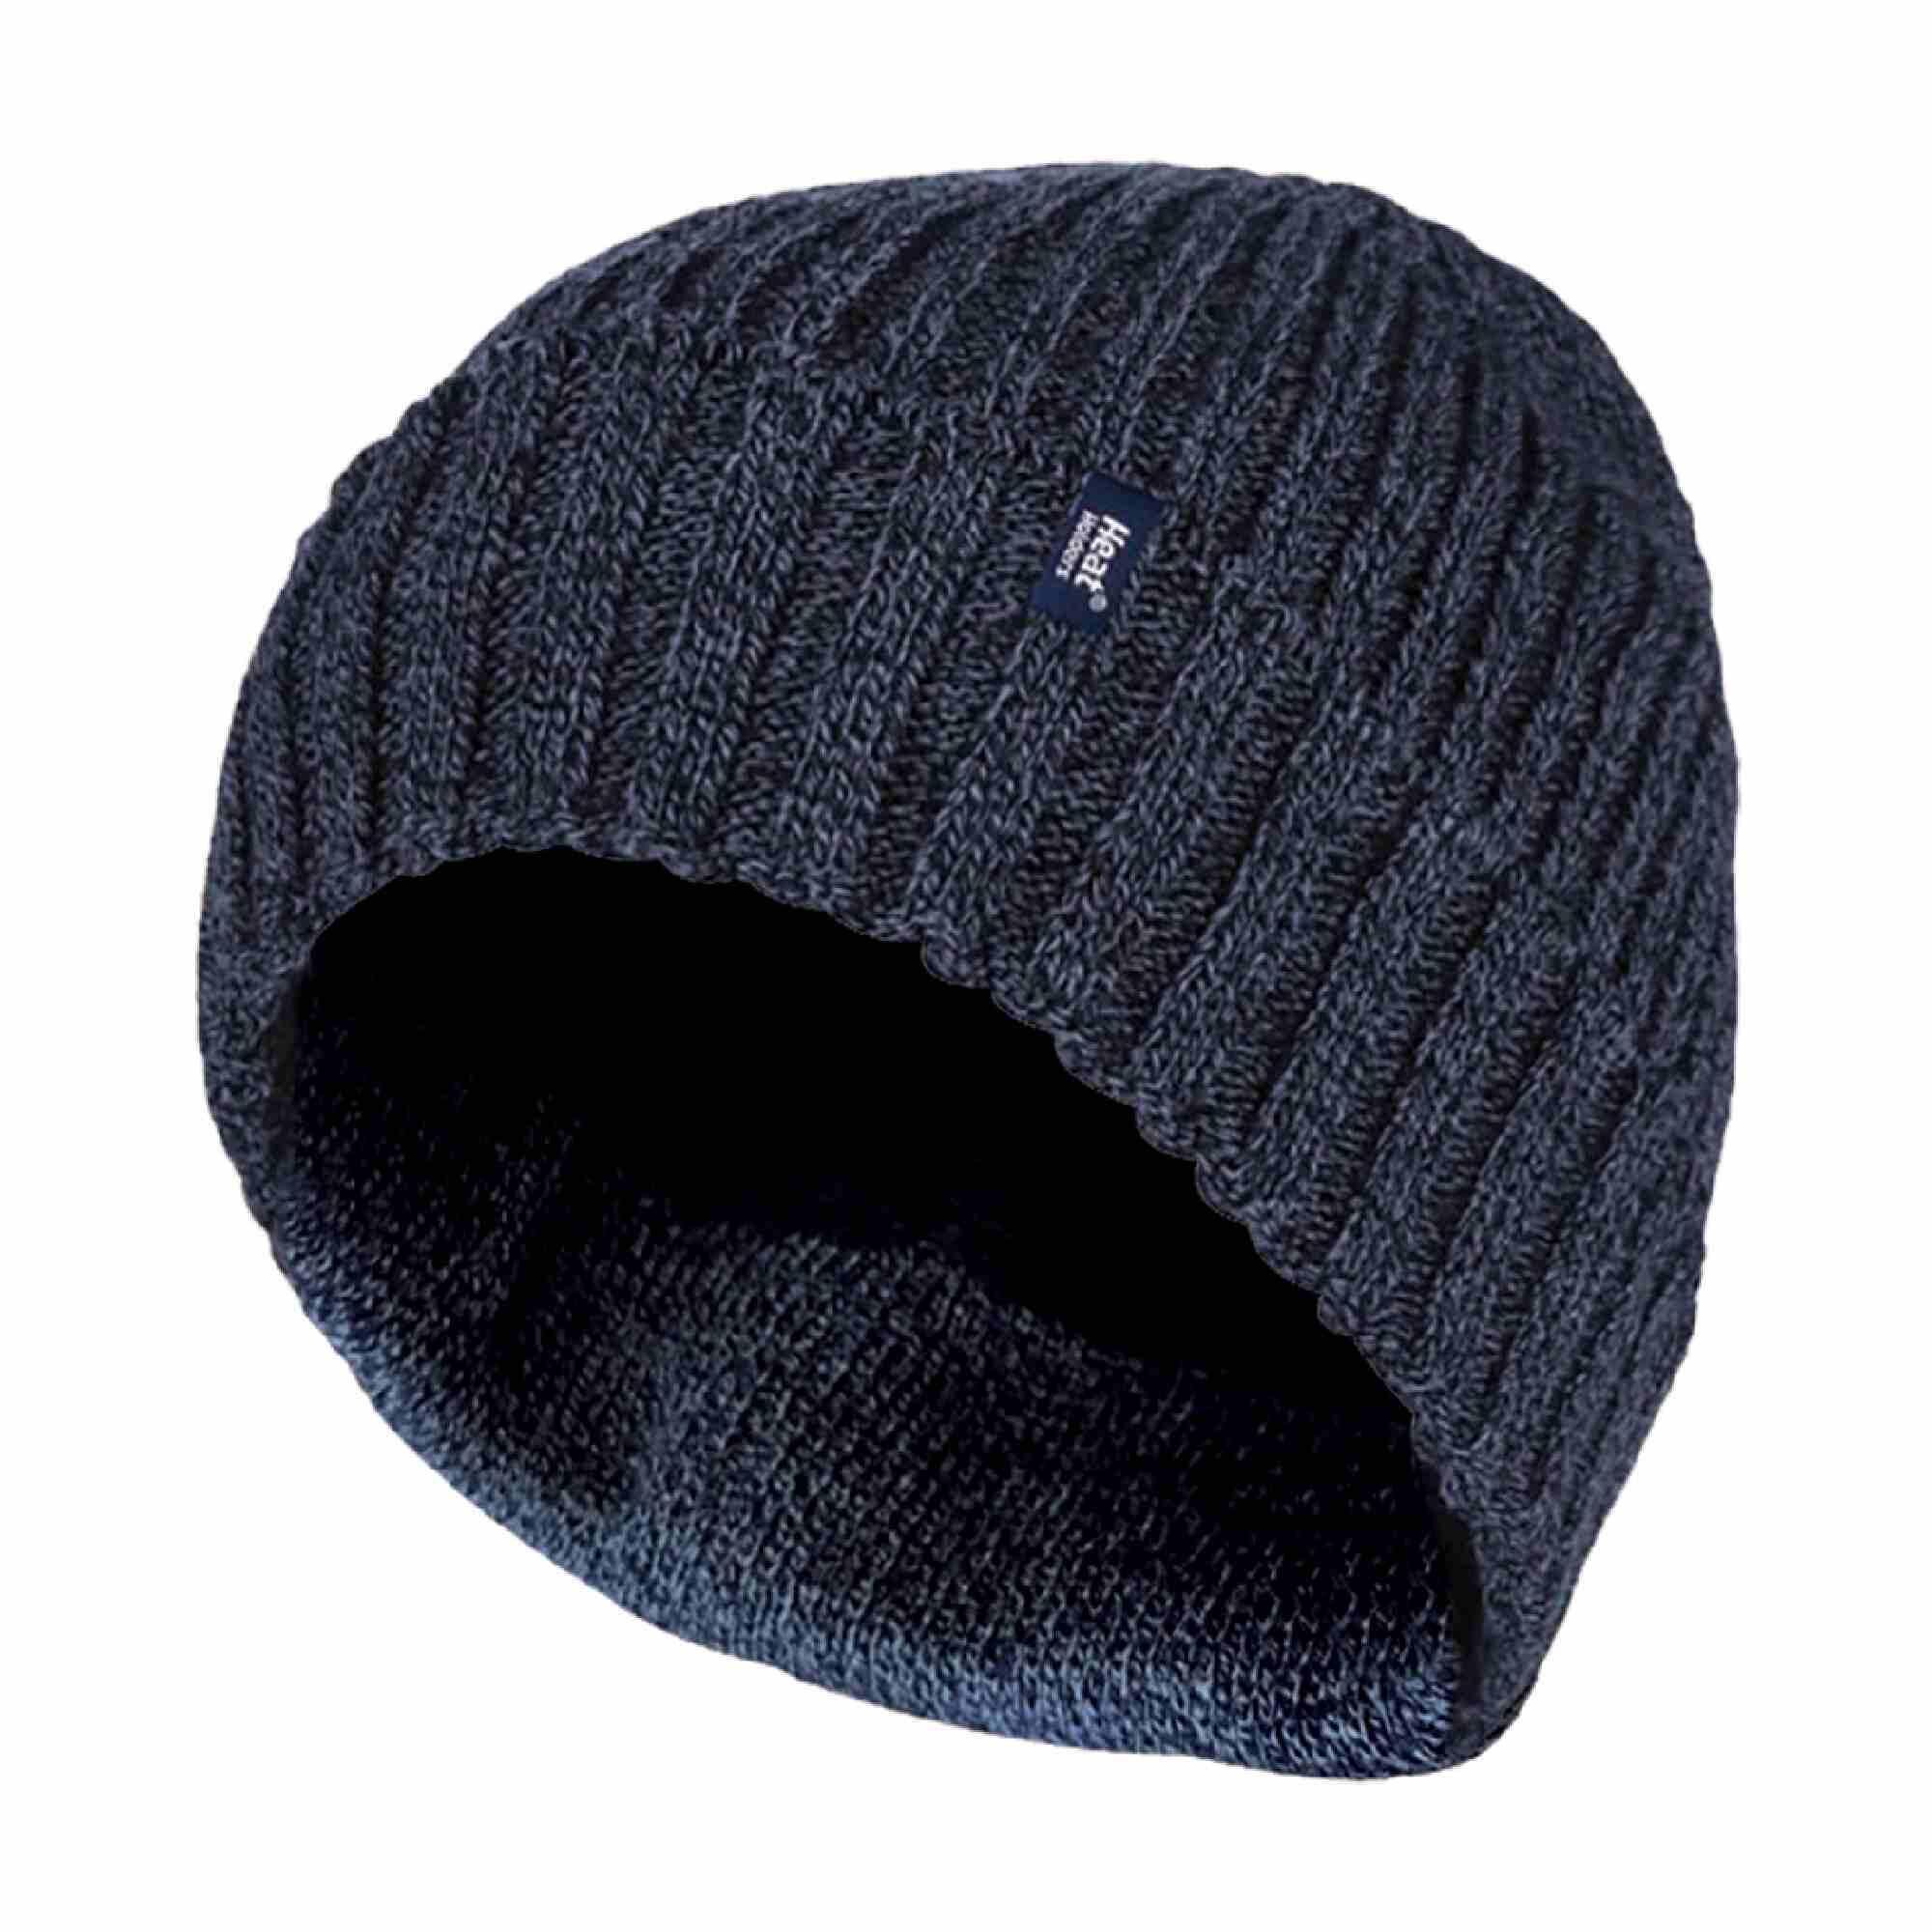 HEAT HOLDERS Mens Ribbed Knit Fleece Lined Warm Turn Over Cuff Thermal Beanie Hat